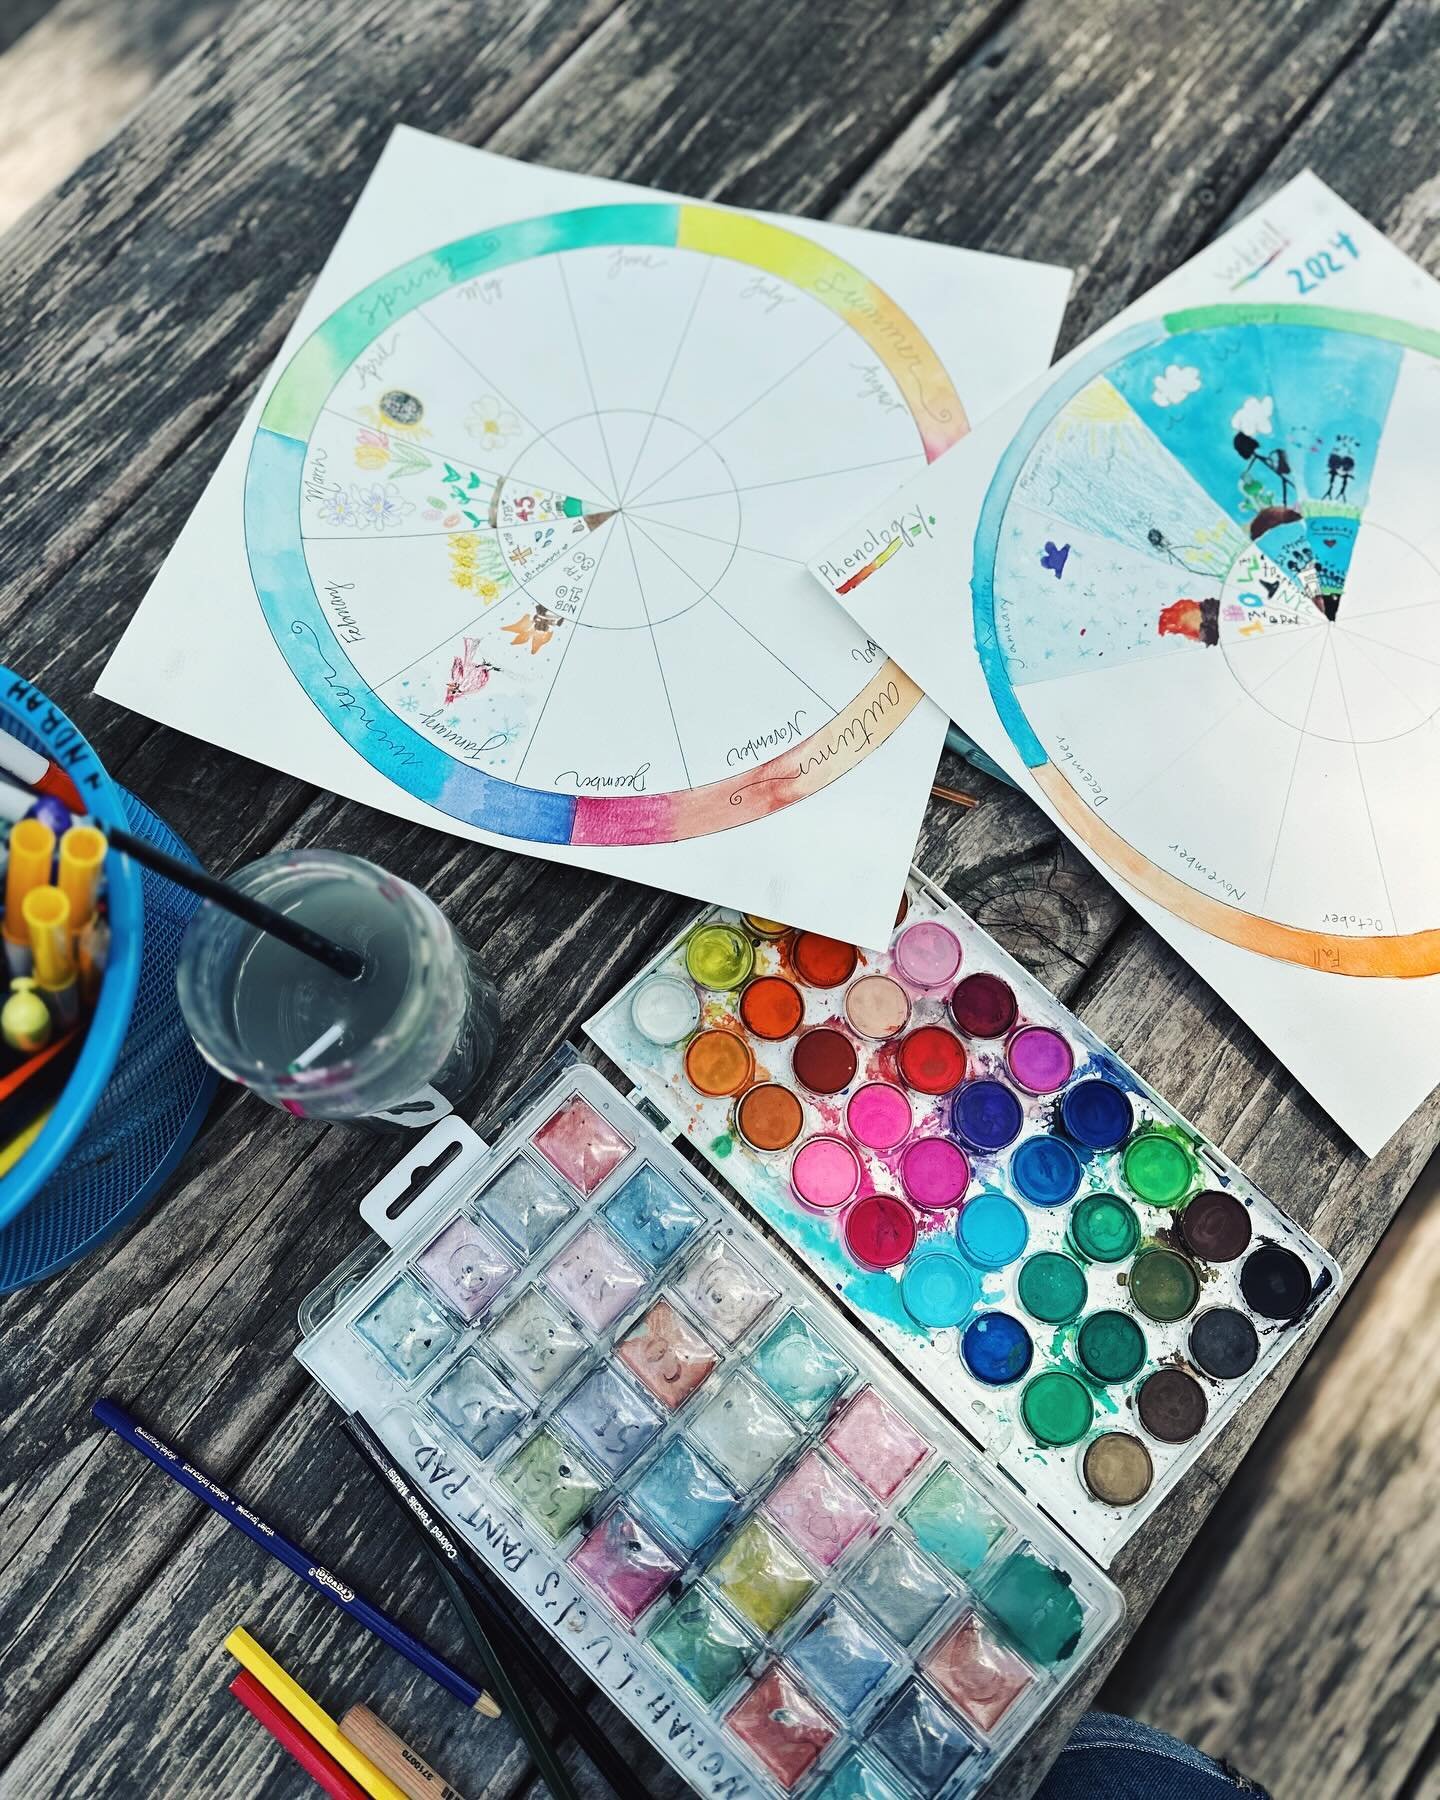 We worked on our phenology wheels in the sunshine yesterday because we all needed a slow, creative school morning. 🌞🌈 This is a unique way of nature journaling your year - in the larger part of each pie slice, you record something that happened in 